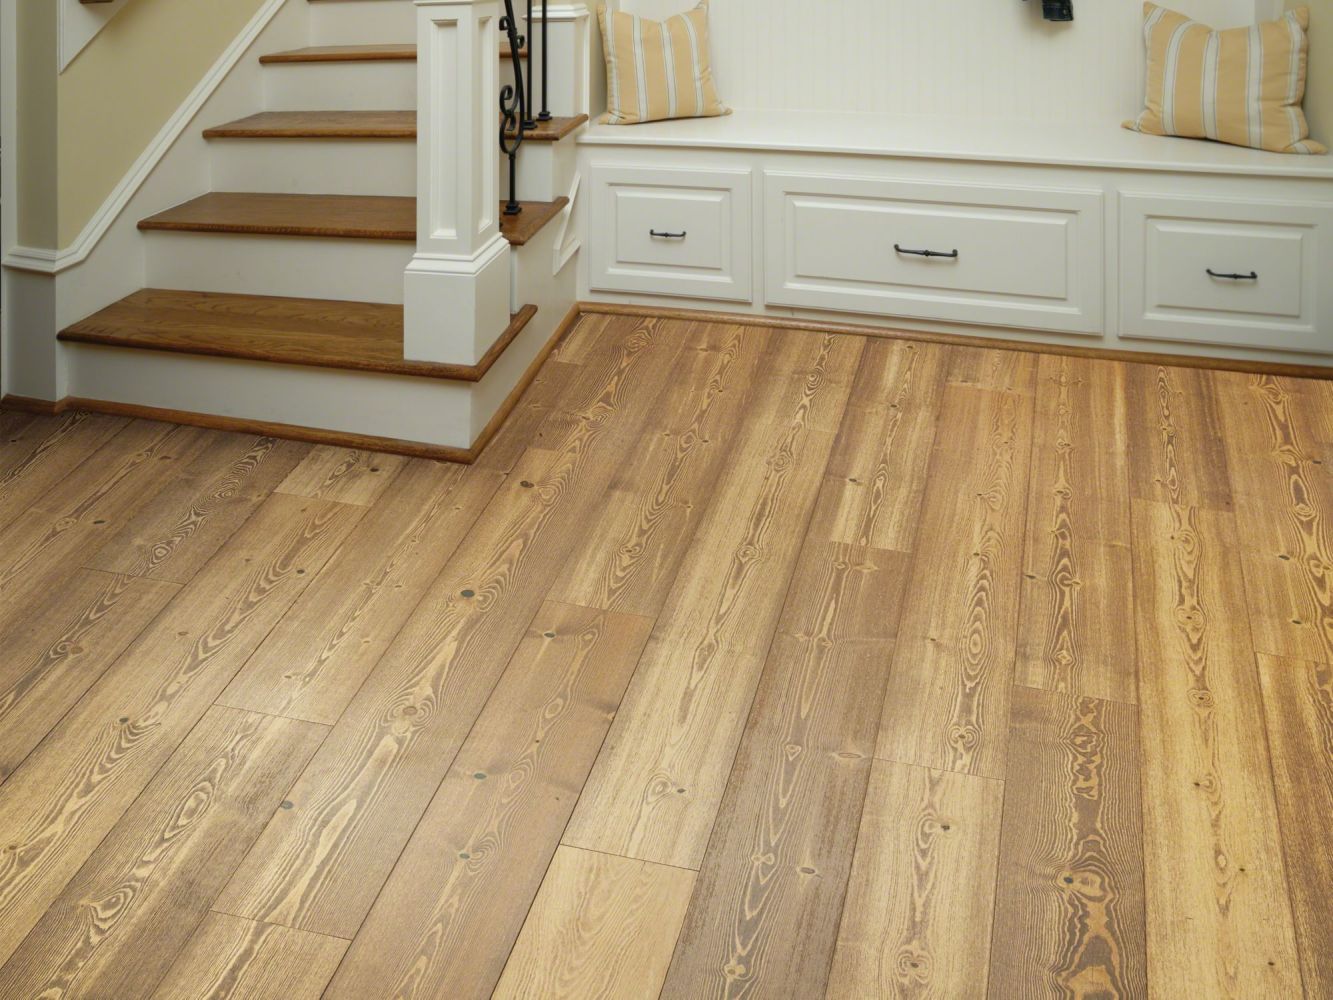 Shaw Floors Floorte Exquisite Spiced Pine 06004_FH820